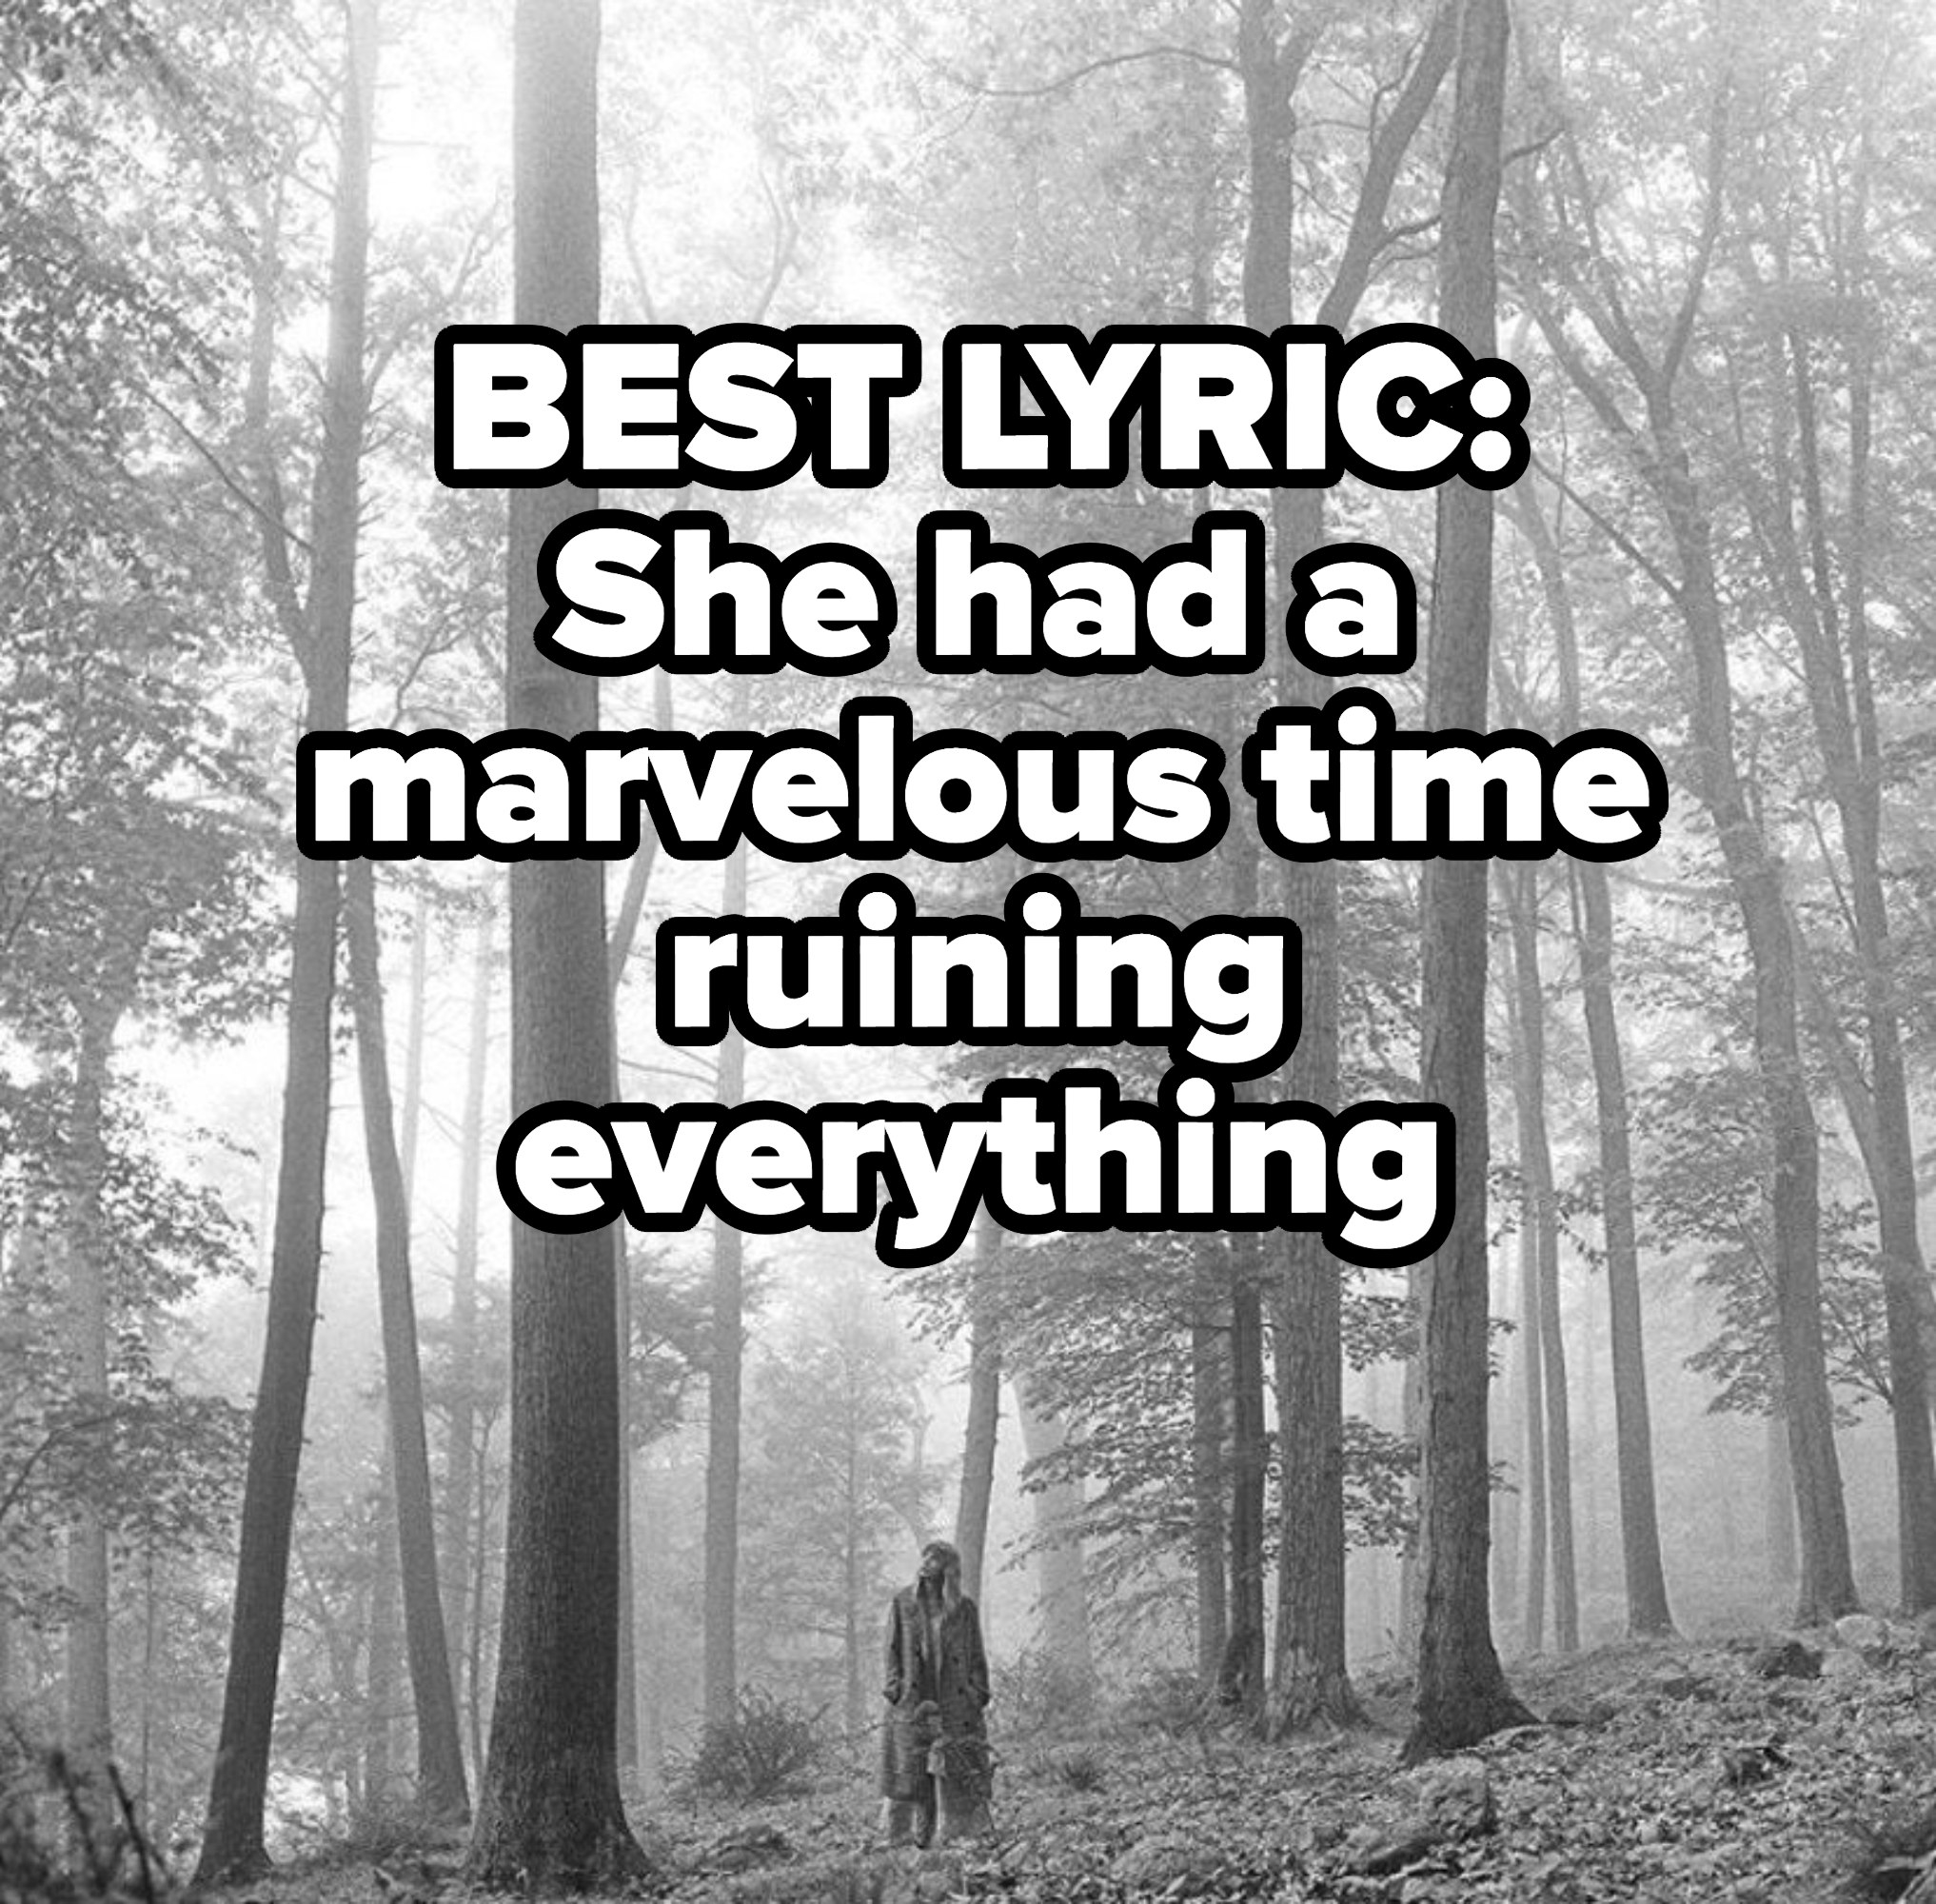 BEST LYRIC:
She had a marvelous time ruining everything